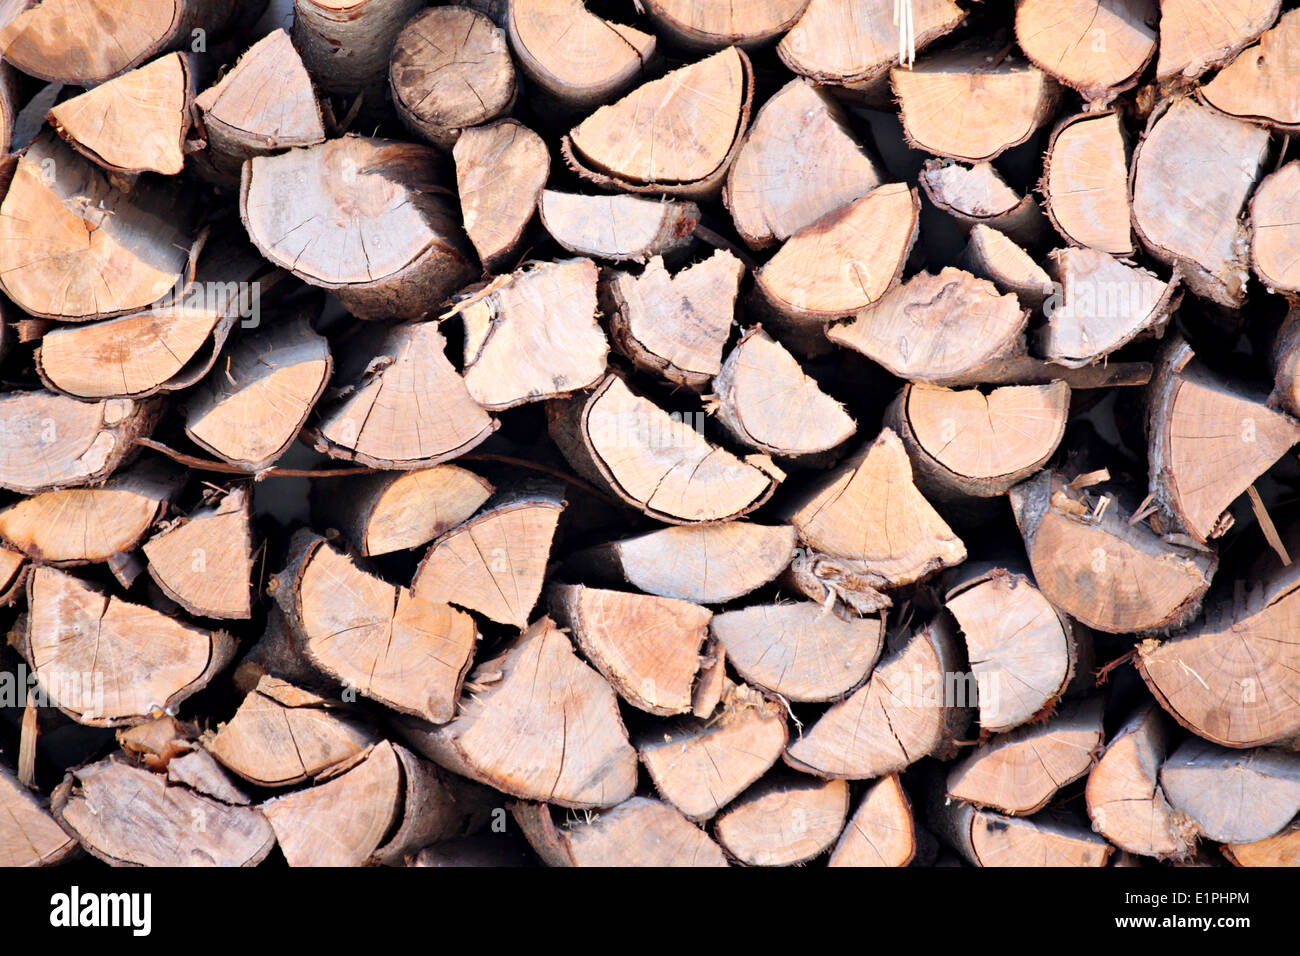 raw material of fuelwood for background. Stock Photo